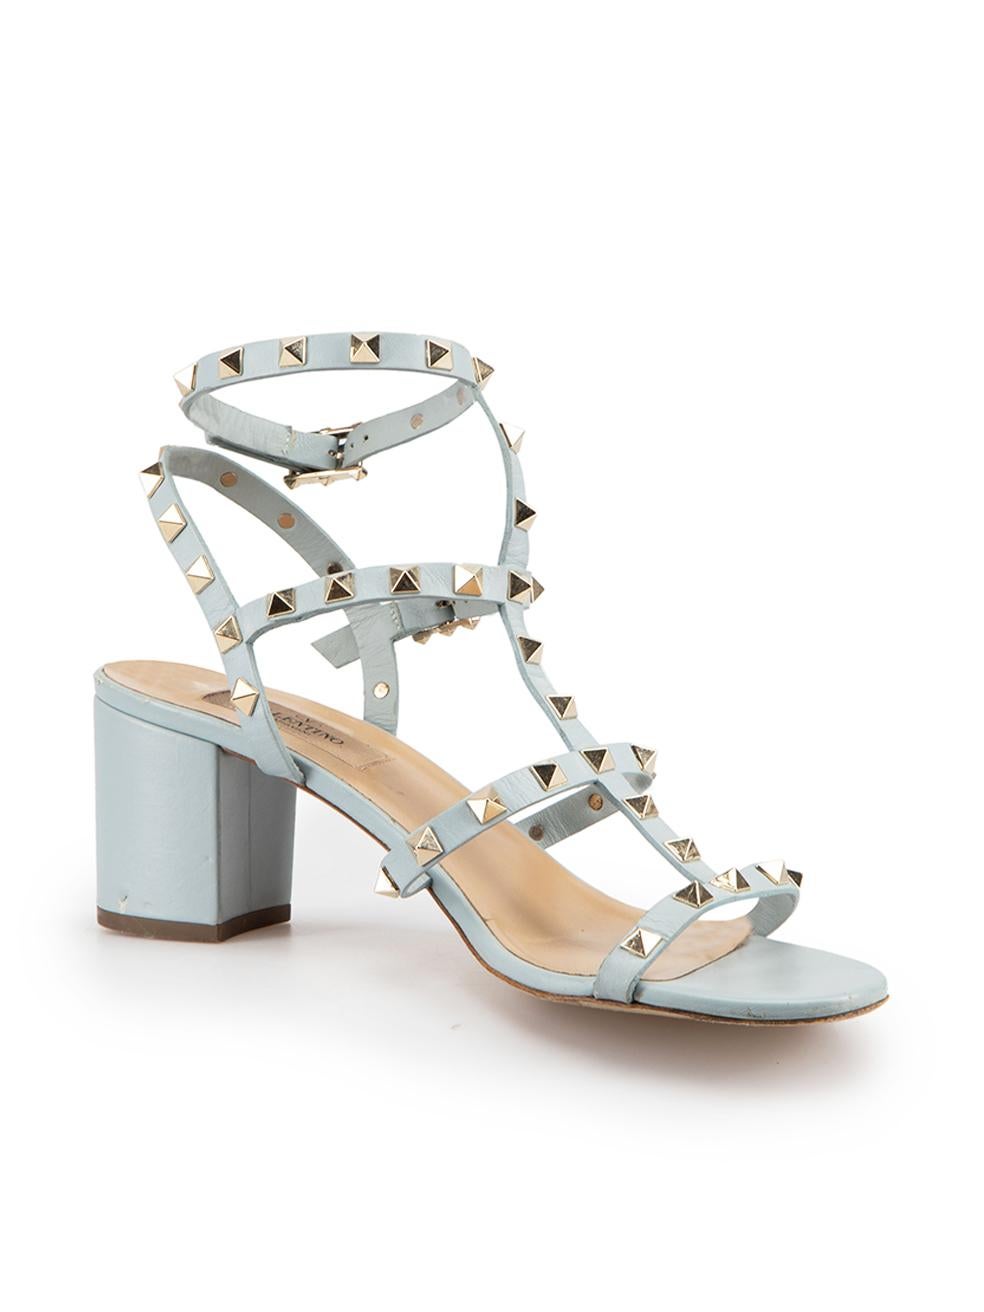 CONDITION is Good. General wear to sandals is evident. Moderate signs of wear to leather with light abrasion to front of toes and back of heels on this used Valentino designer resale item.
  
Details
Blue
Leather
Strappy sandals
Rockstud embellish